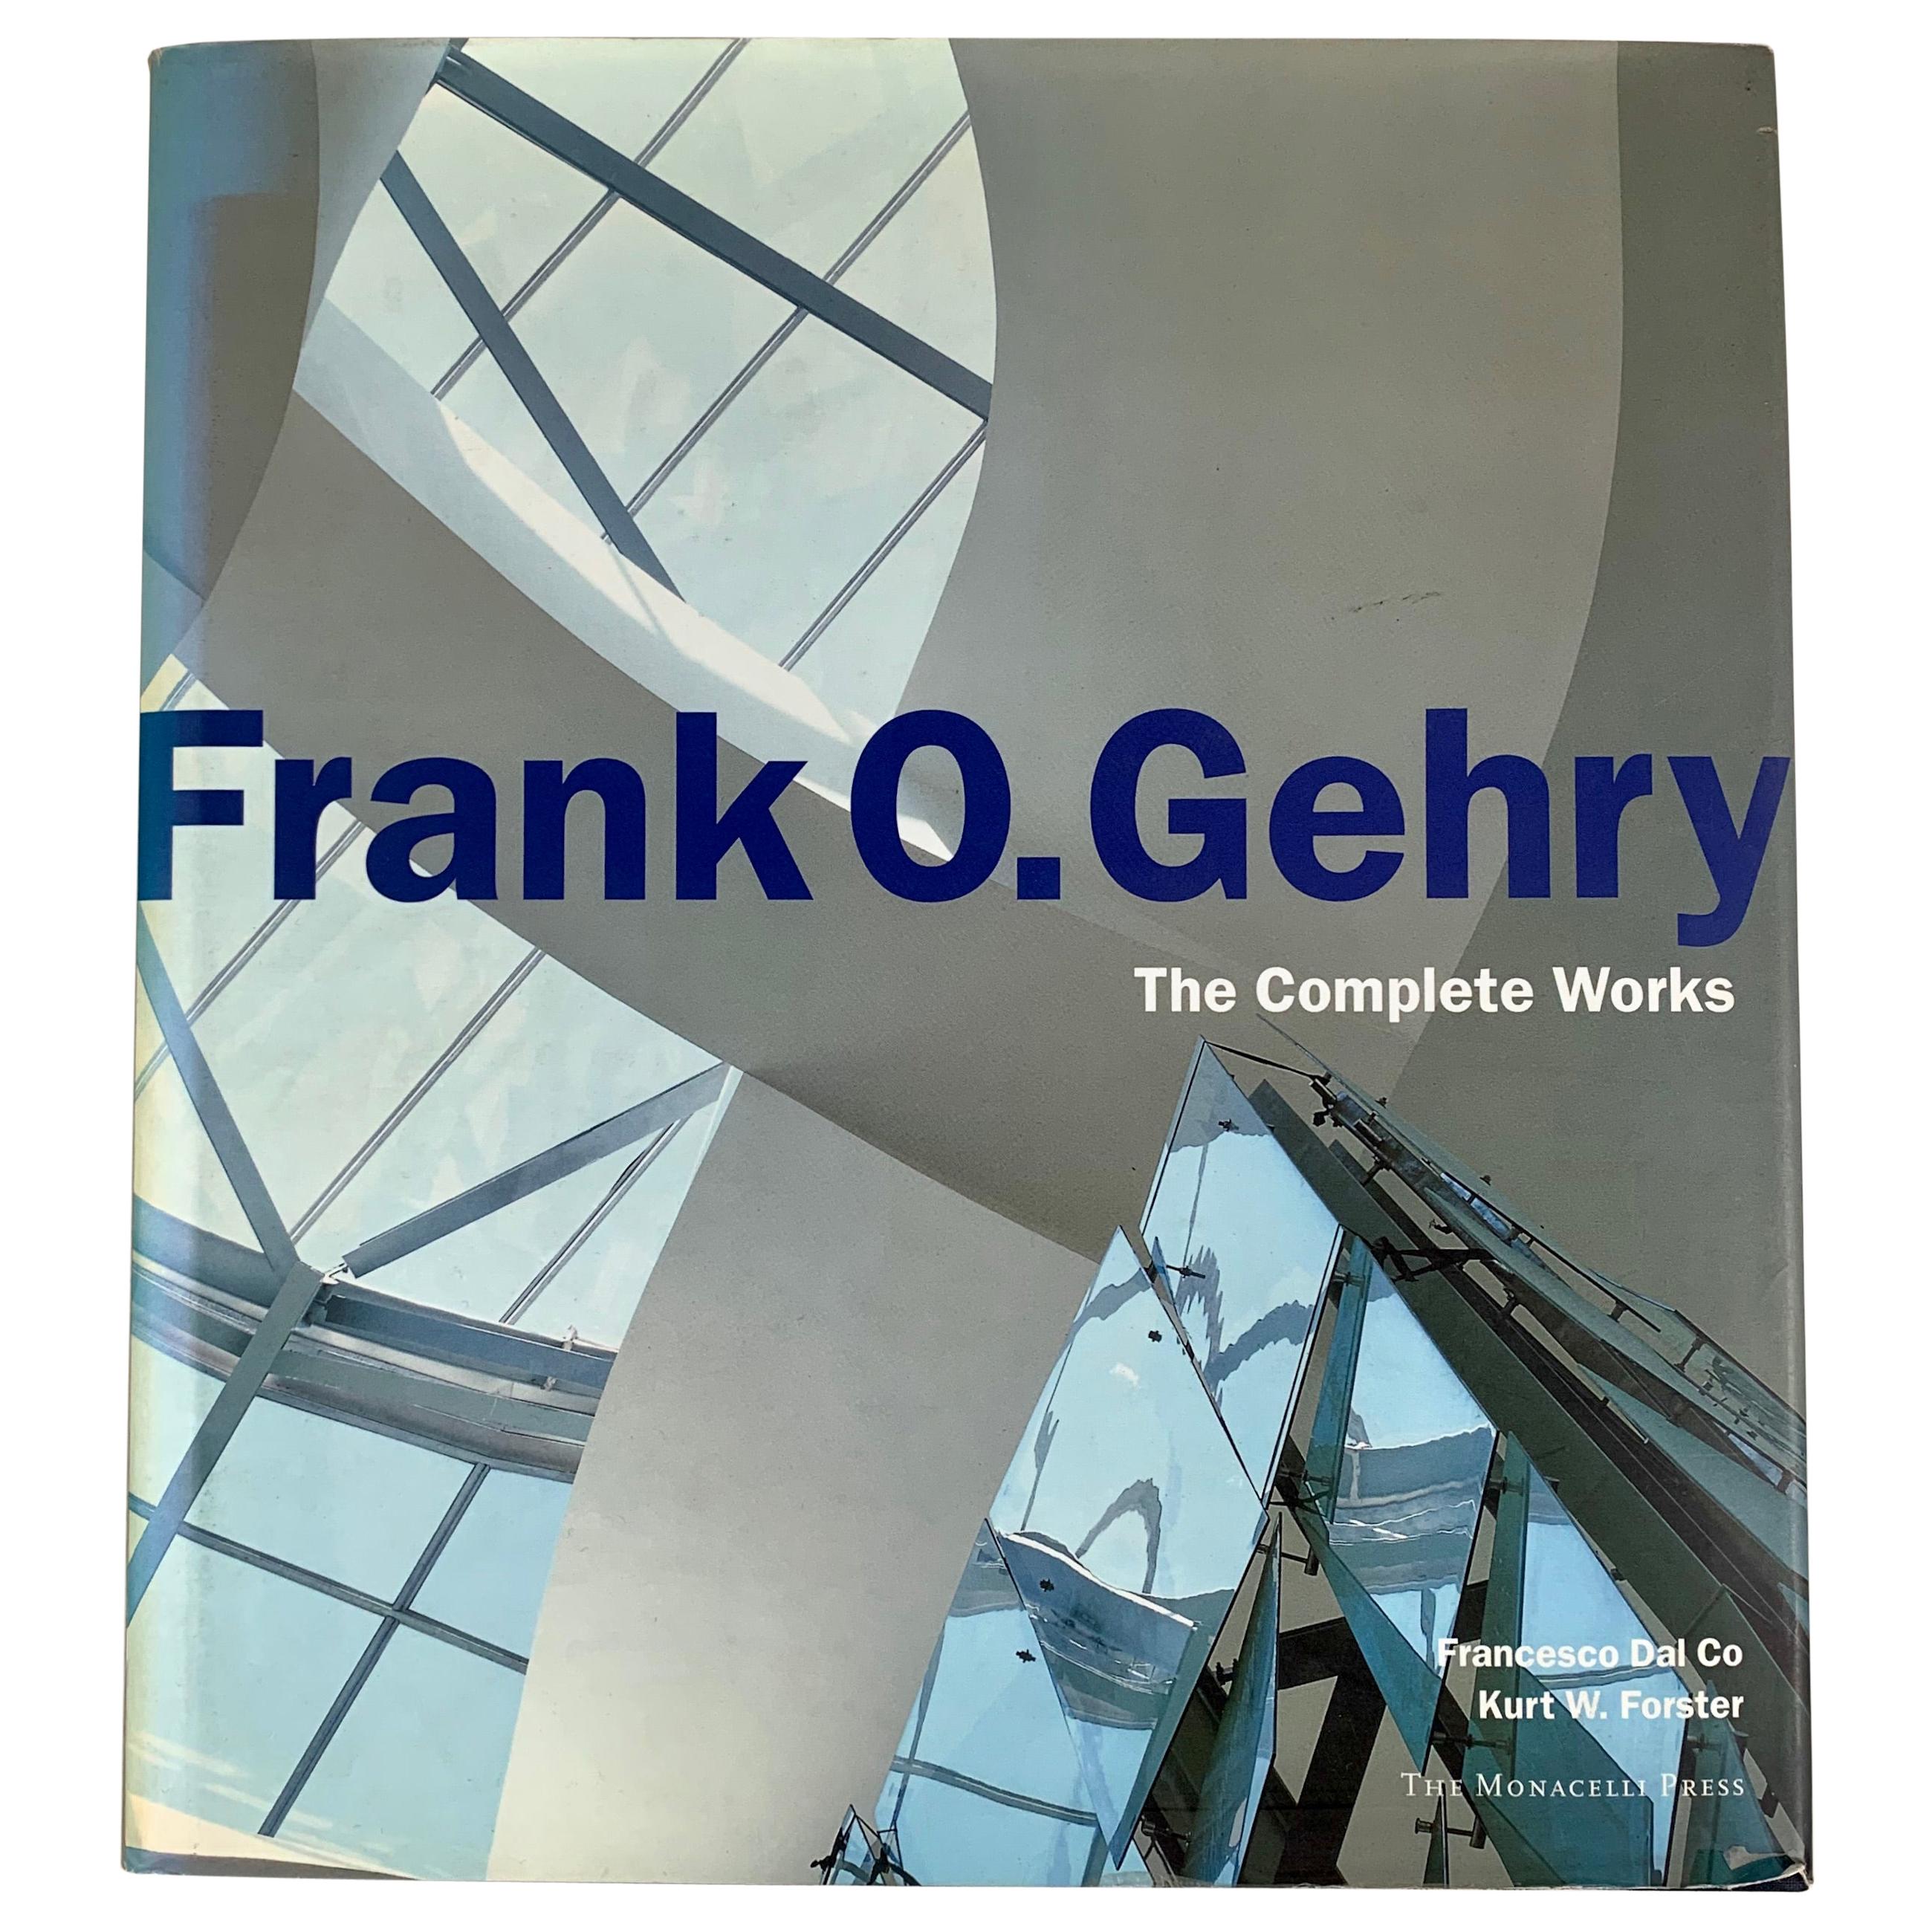 Frank O Gehry, The Complete Works by Francesco Dal Co. Modern Architecture Book